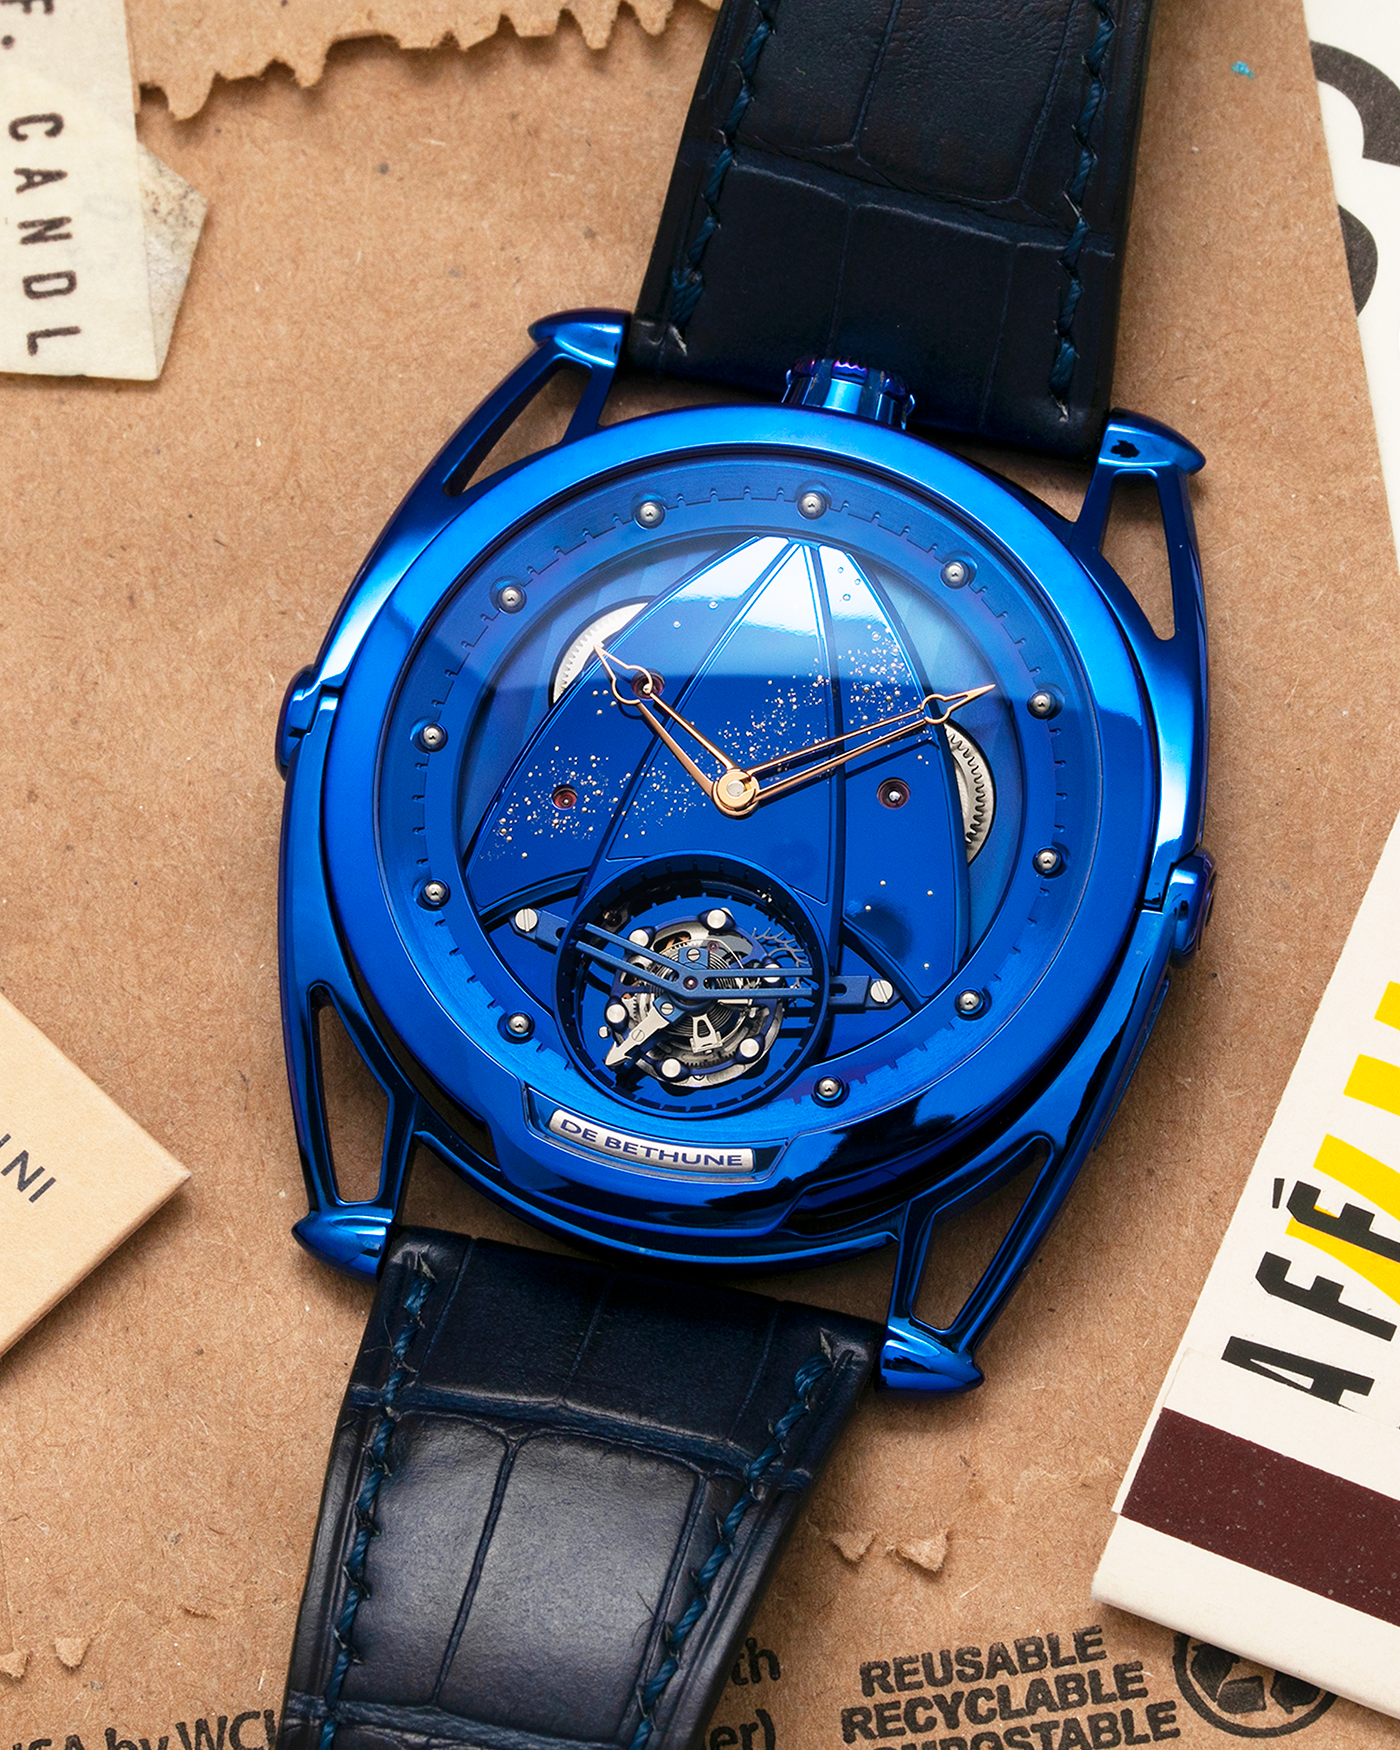 Brand: De Bethune Year: 2021 Model: Tourbillon Reference: DB28 ‘Kind of Blue’ Milky Way, Limited Edition of 5 Pieces Material: Blued Grade 5 Titanium Movement: Cal. DB2019, Manual-Winding Case Diameter: 43mm Strap: De Bethune Dark Blue Alligator Leather Strap with Signed Blued Titanium Tang Buckle, with additional De Bethune Dark Blue Tungsten Lizard Leather Strap